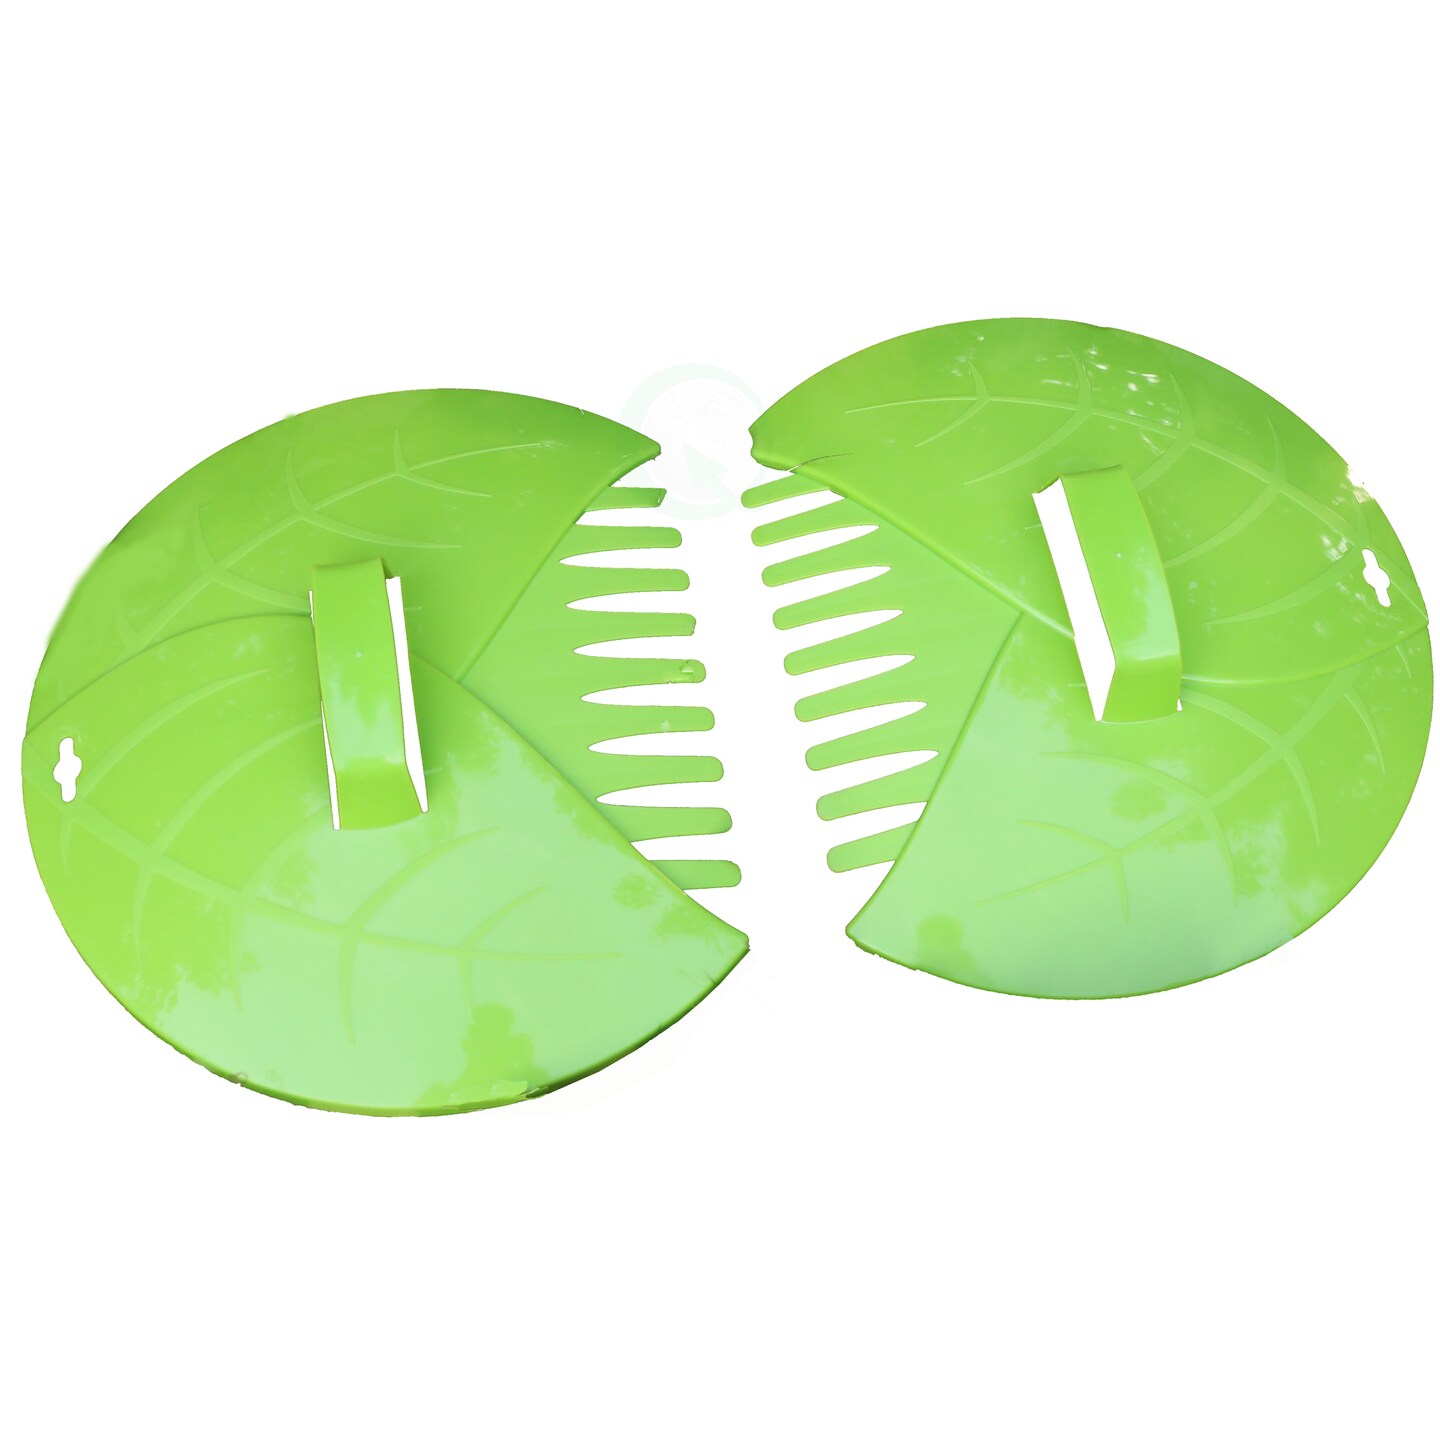 Gardenised Decorative Pair of Leaf Scoops Hand Rakes for Lawn and Garden Cleanup